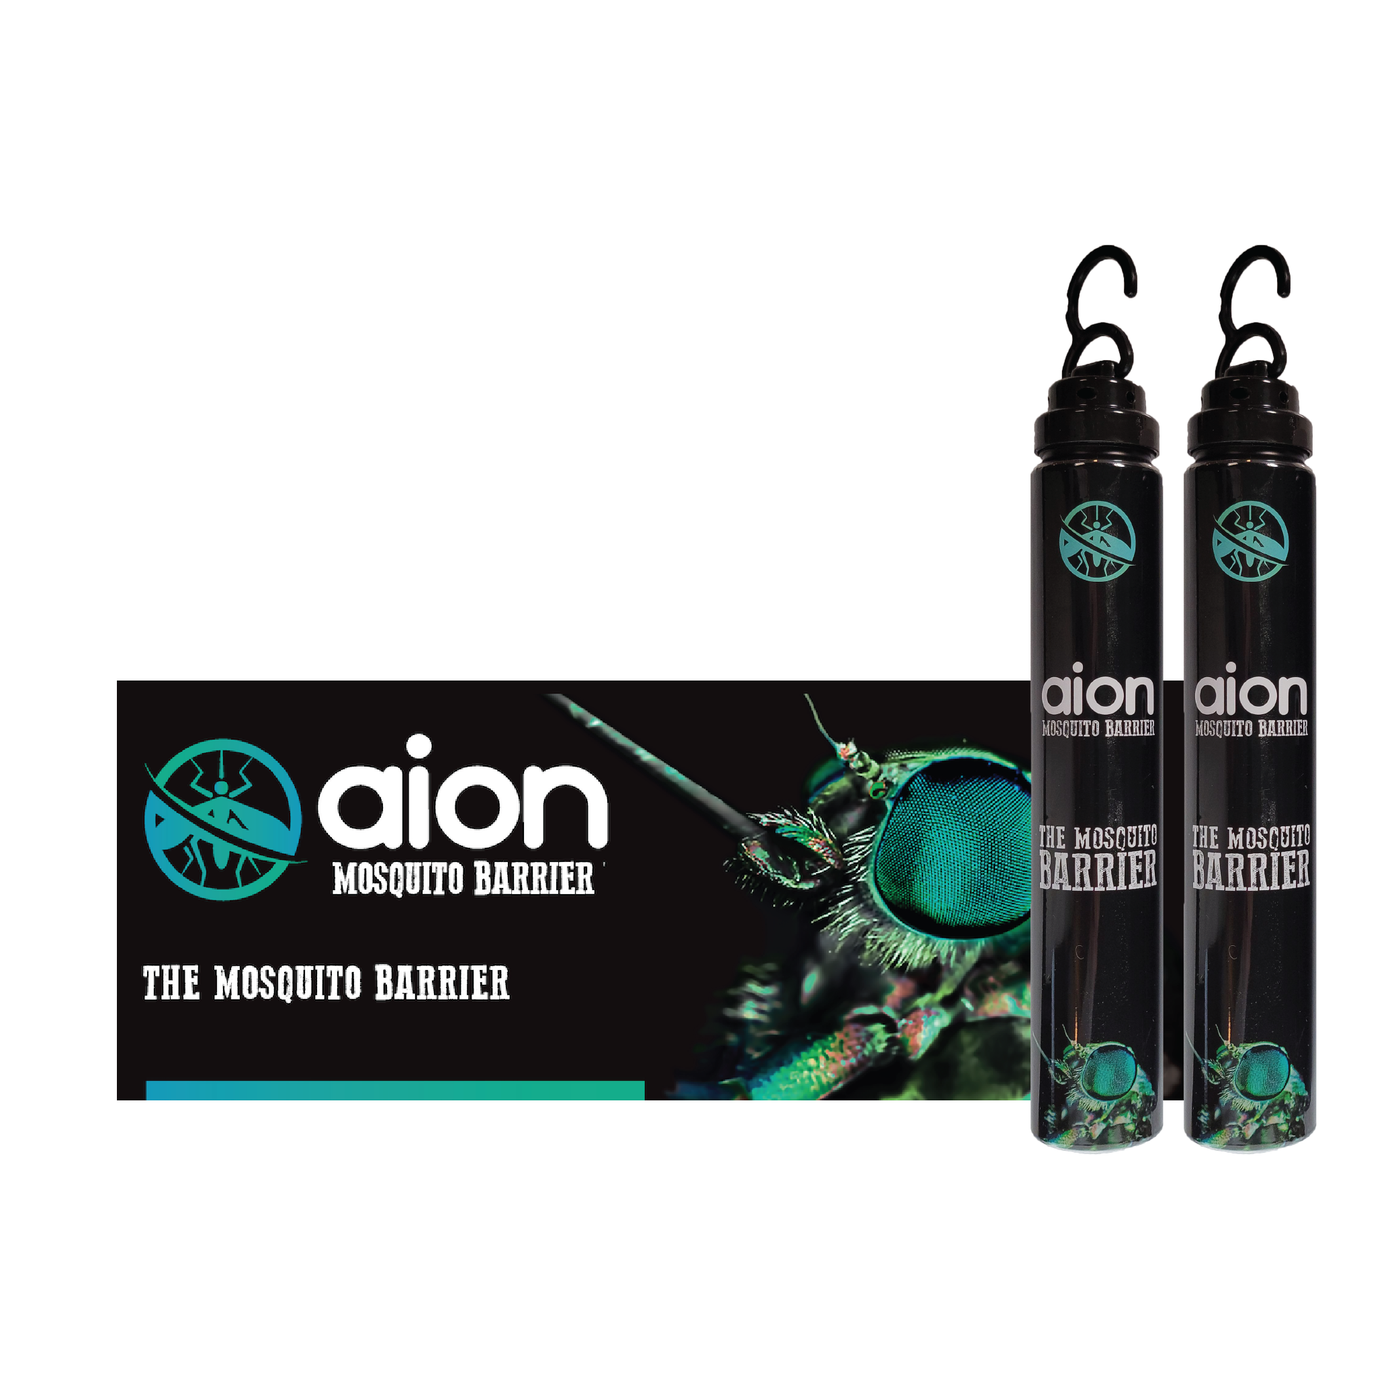 Aion Mosquito Barrier